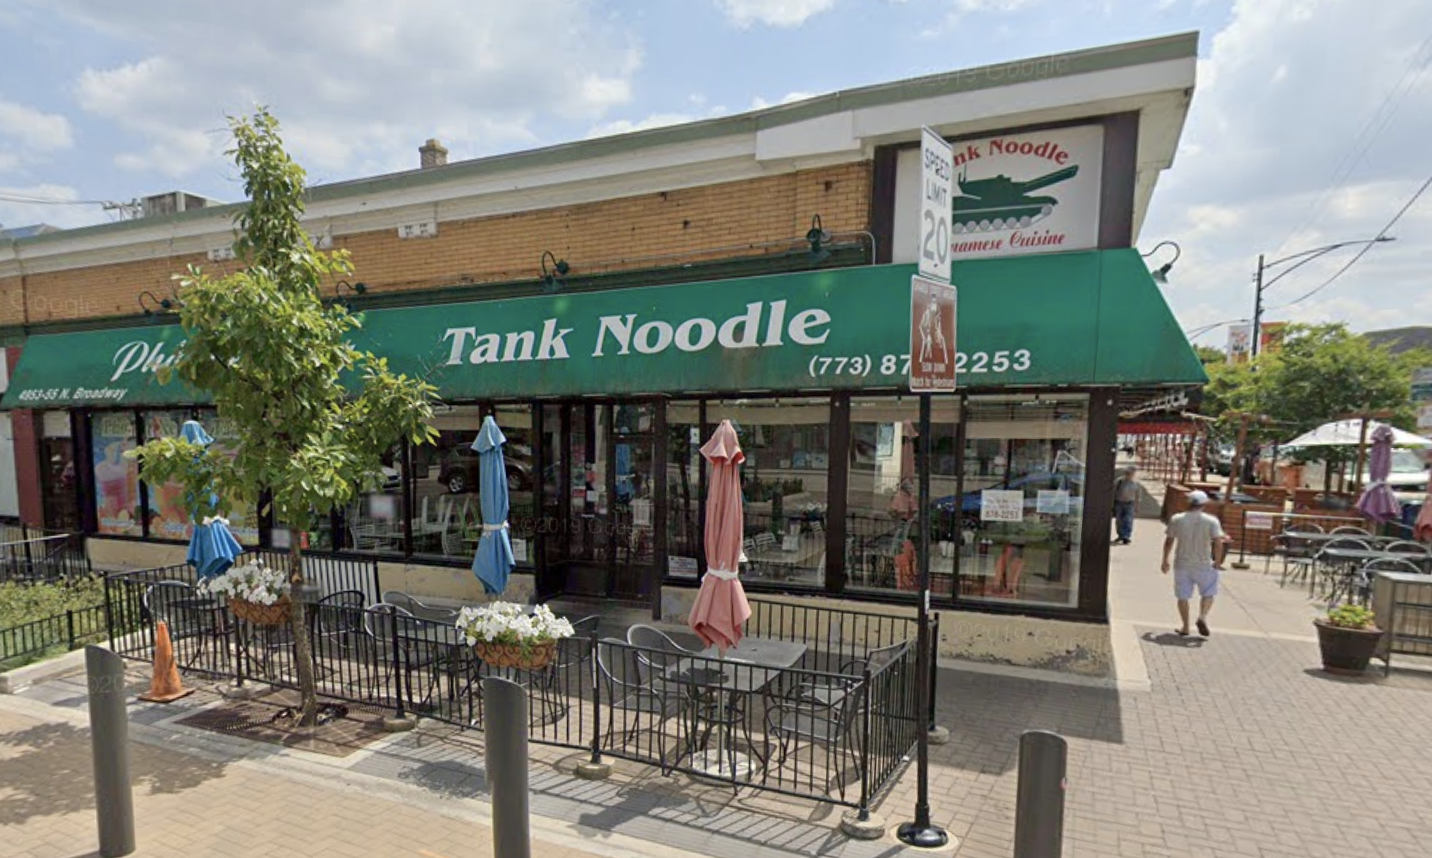 A corner restaurant with green awning that reads “Tank Noodle.”